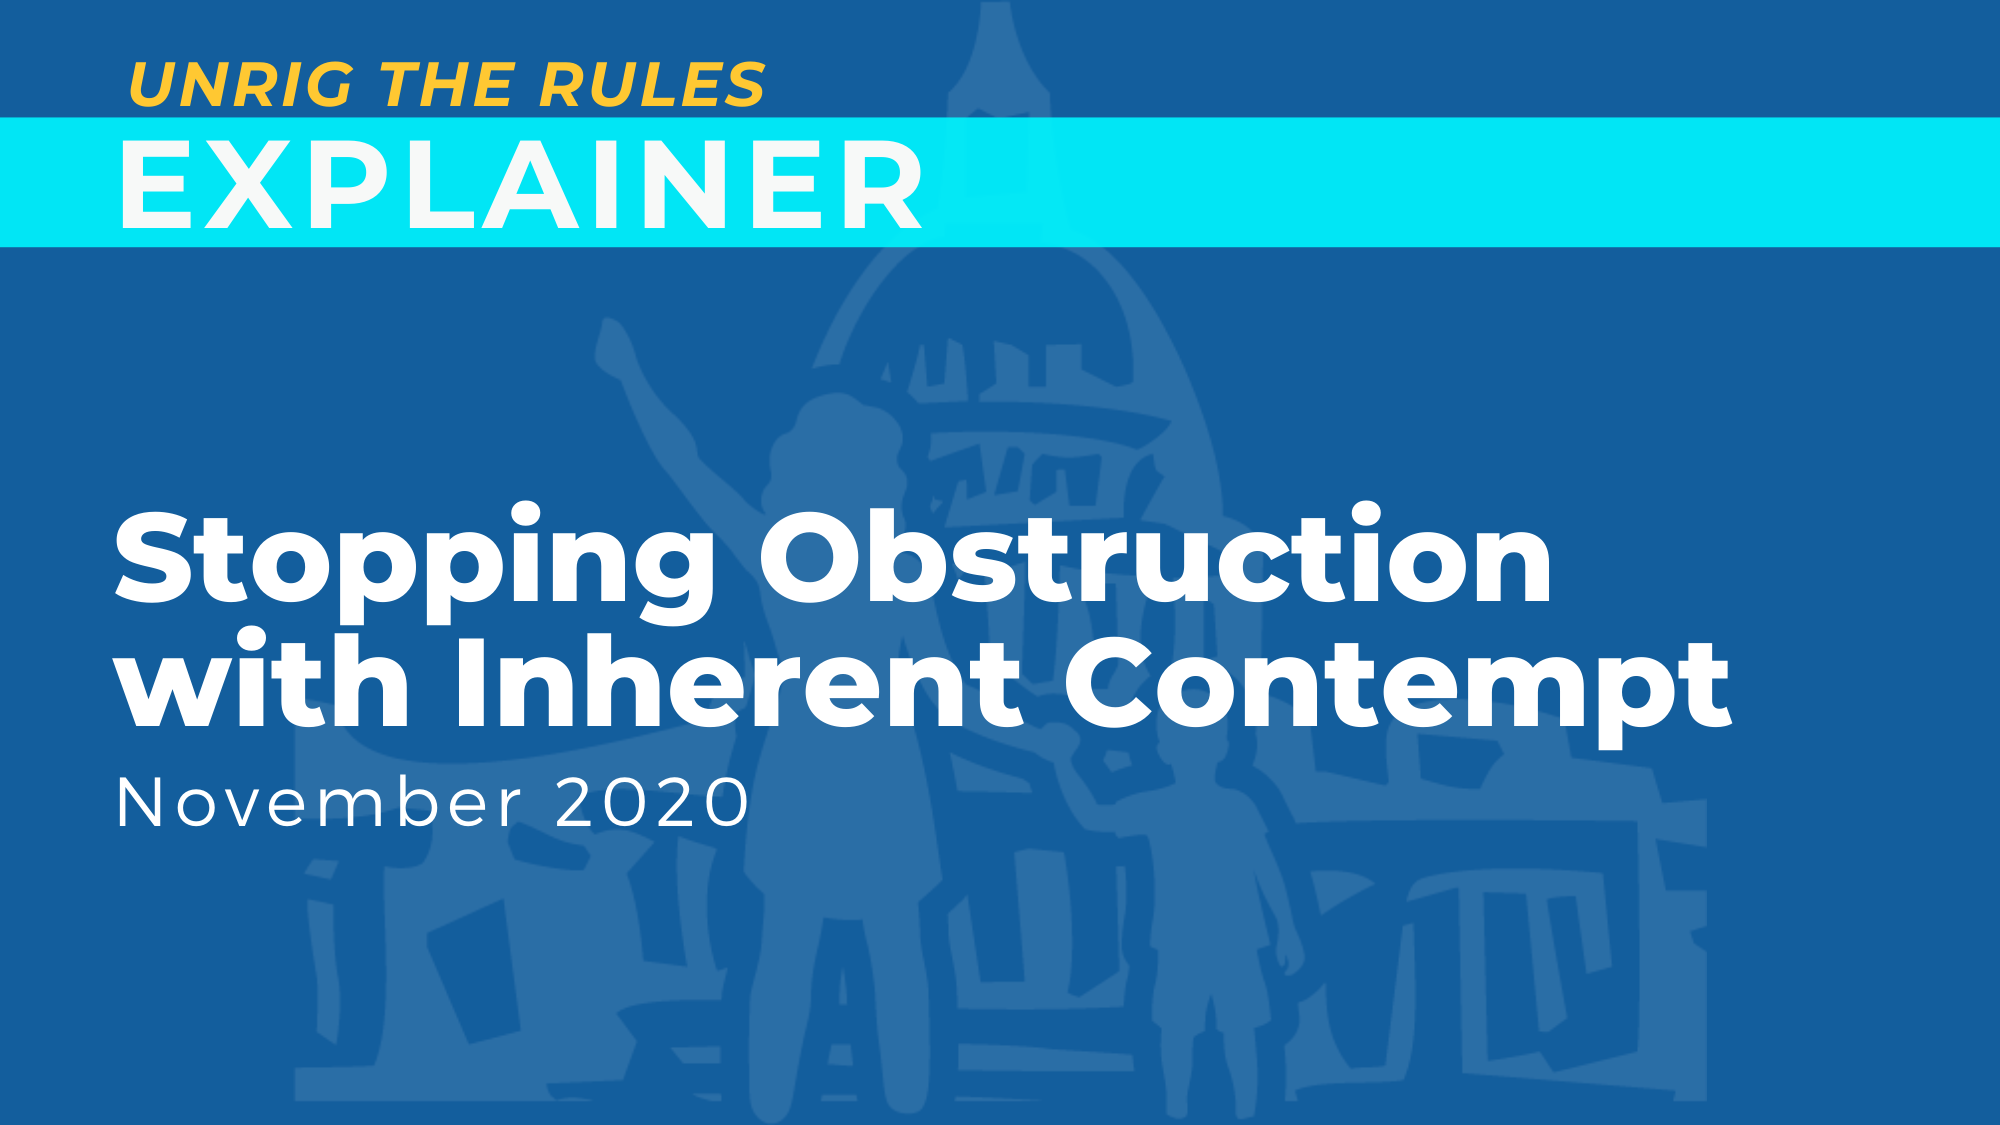 Stopping Obstruction with Inherent Contempt